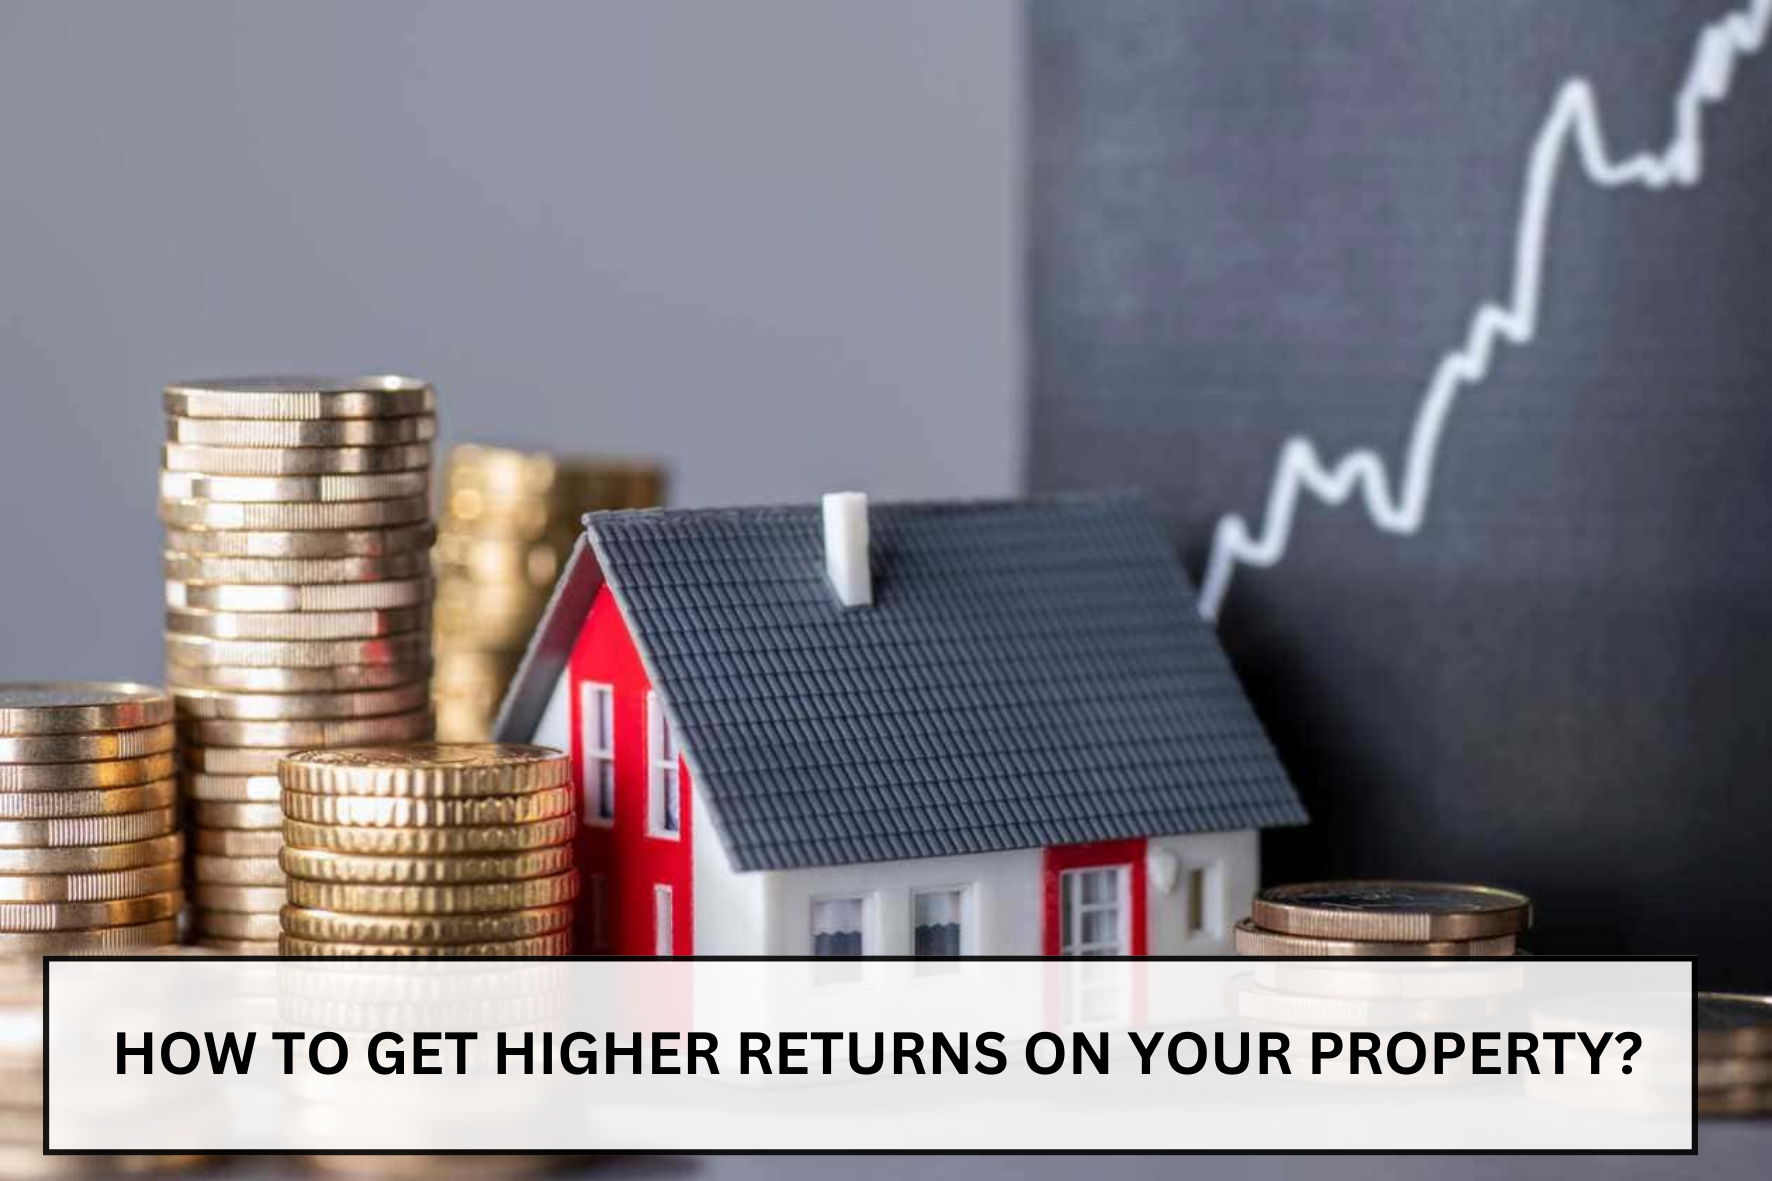 uploads/blog/Add_a_suHow_to_Get_Higher_Returns_on_Your_Property.png